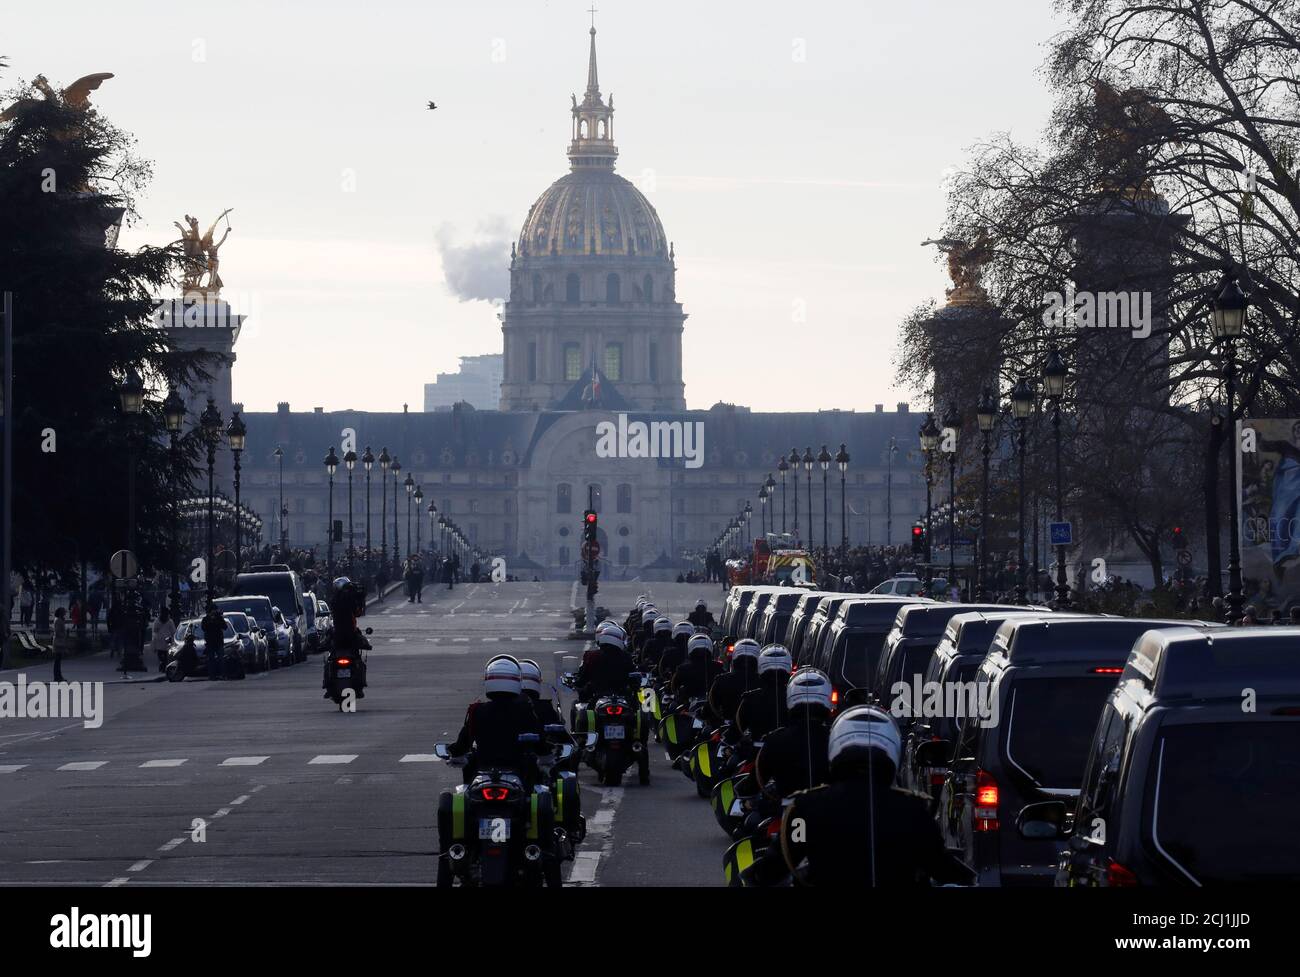 The hearses with the coffins of late thirteen French soldiers killed in Mali make their way past the Alexandre III bridge during a funeral convoy before a ceremony at the Hotel National des Invalides in Paris, France, December 2, 2019. French soldiers Julien Carrette, Benjamin Gireud, Romain Salles de Saint-Paul, Clement Frison-Roche, Nicolas Megard, Romain Chomel de Jarnieu, Pierre Bockel, Alex Morisse, Jeremy Leusie, Alexandre Protin, Antoine Serre, Valentin Duval, Andrei Jouk died in Mali when their helicopters collided in the dark last week as they hunted for Islamist militants.   REUTERS/ Stock Photo